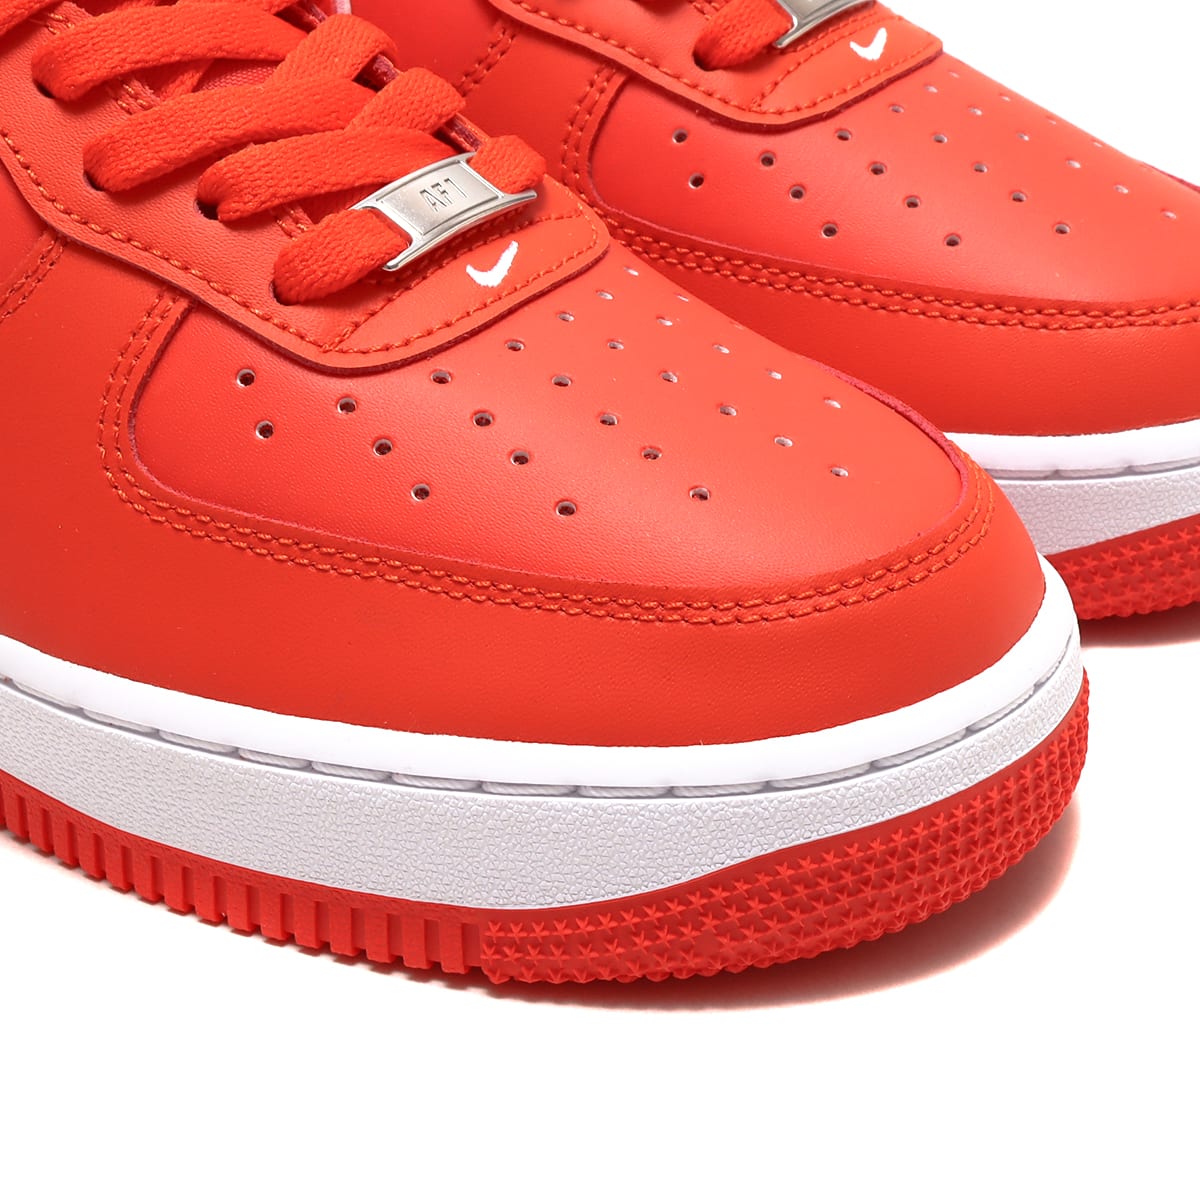 NIKE AIR FORCE 1 '07 PICANTE RED/PICANTE RED-WHITE